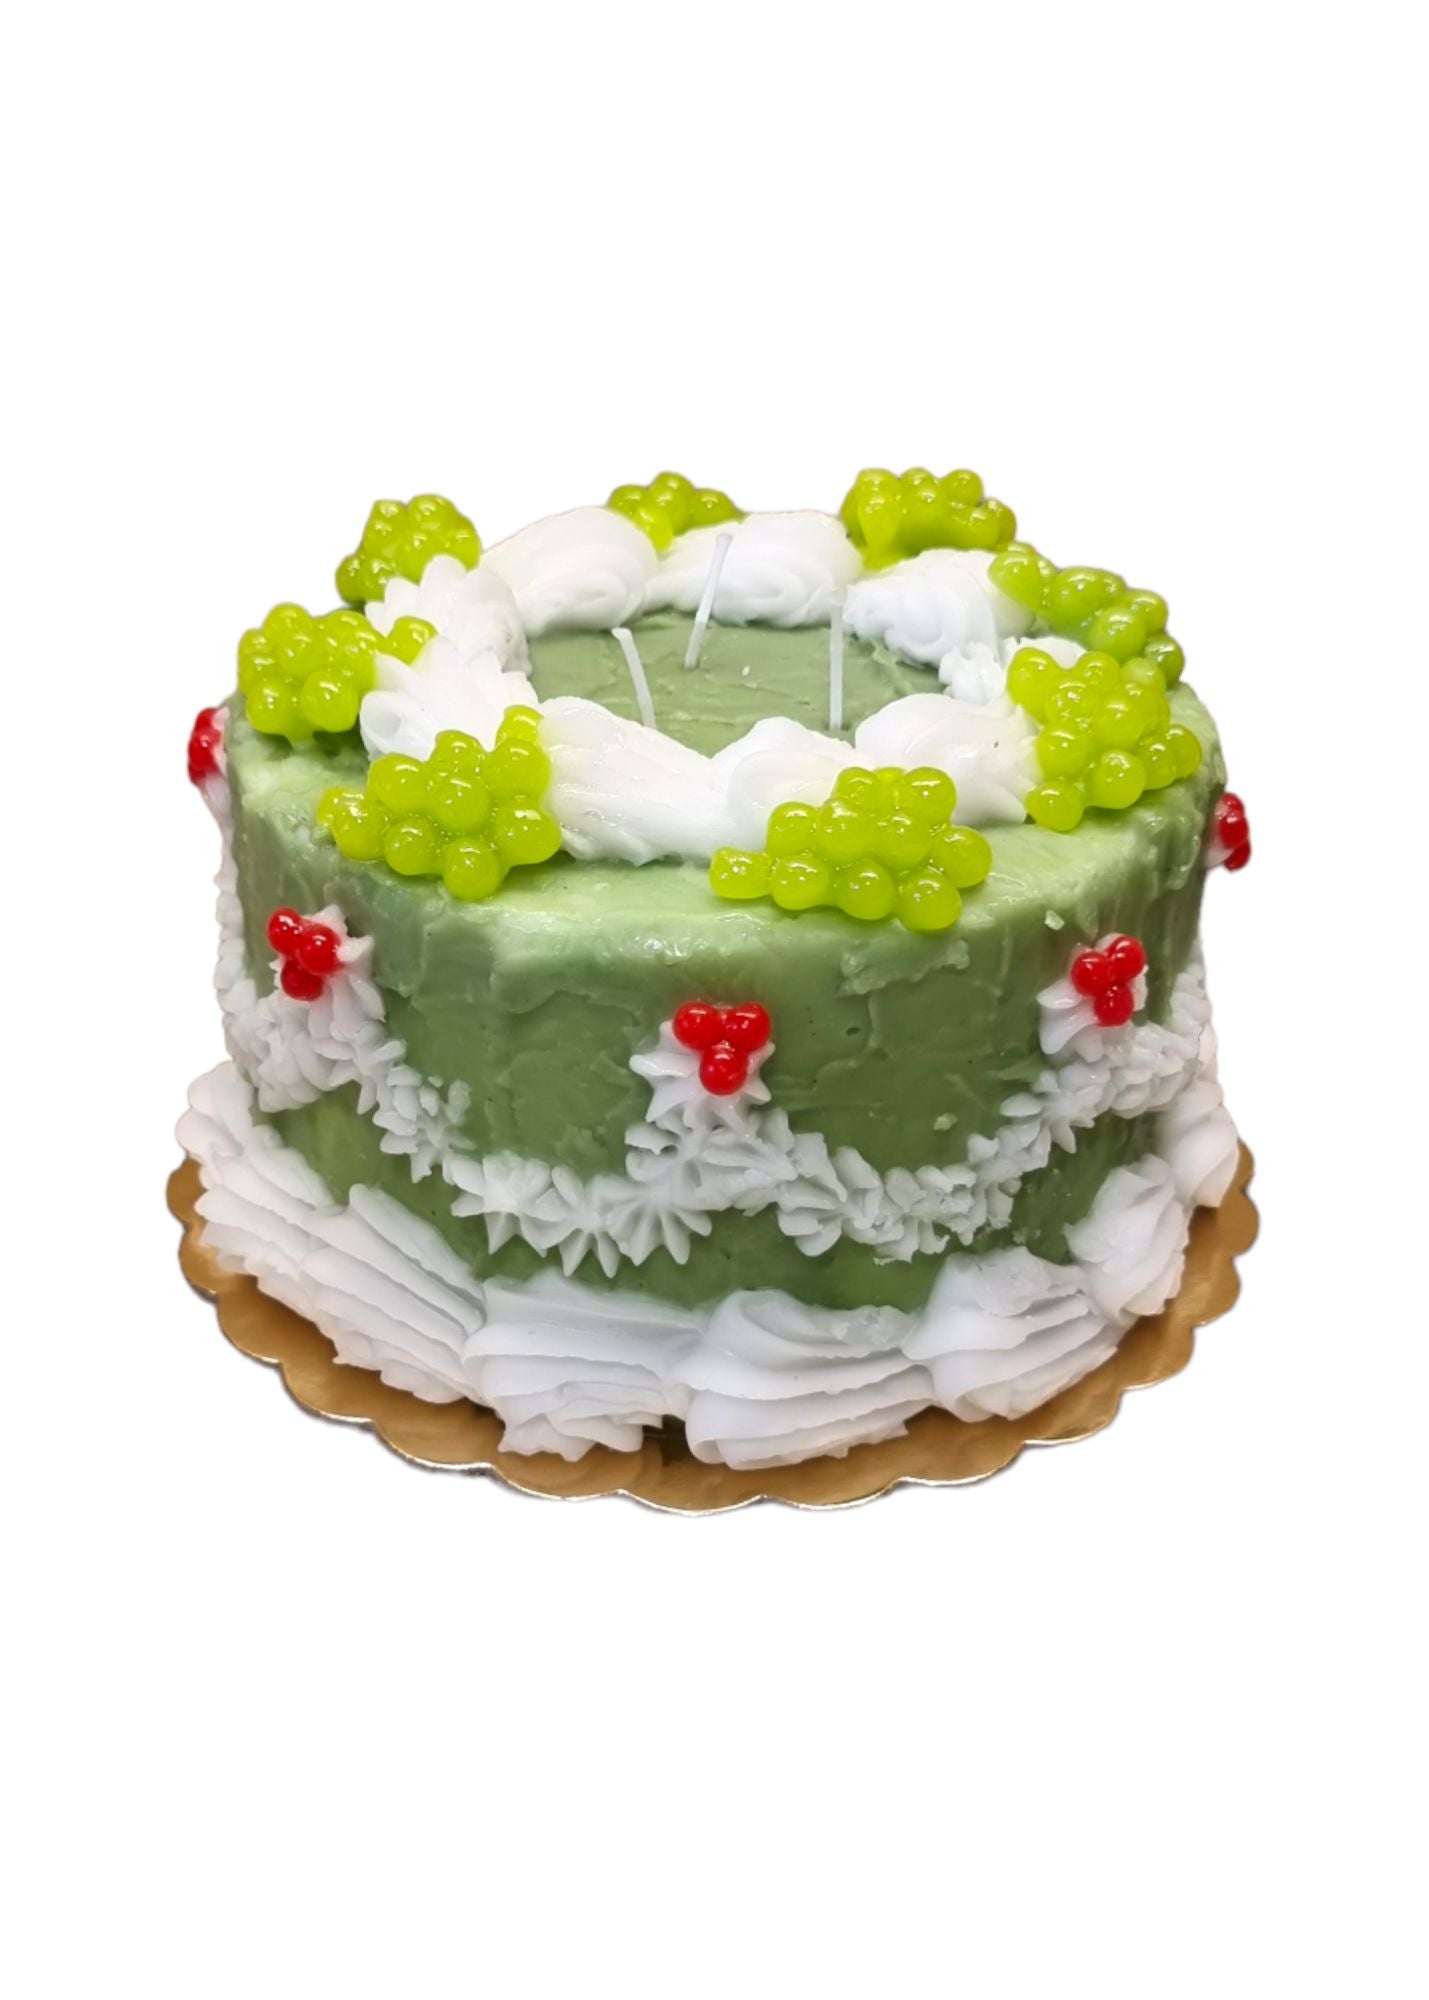 GREEN TIER CAKE CANDLE